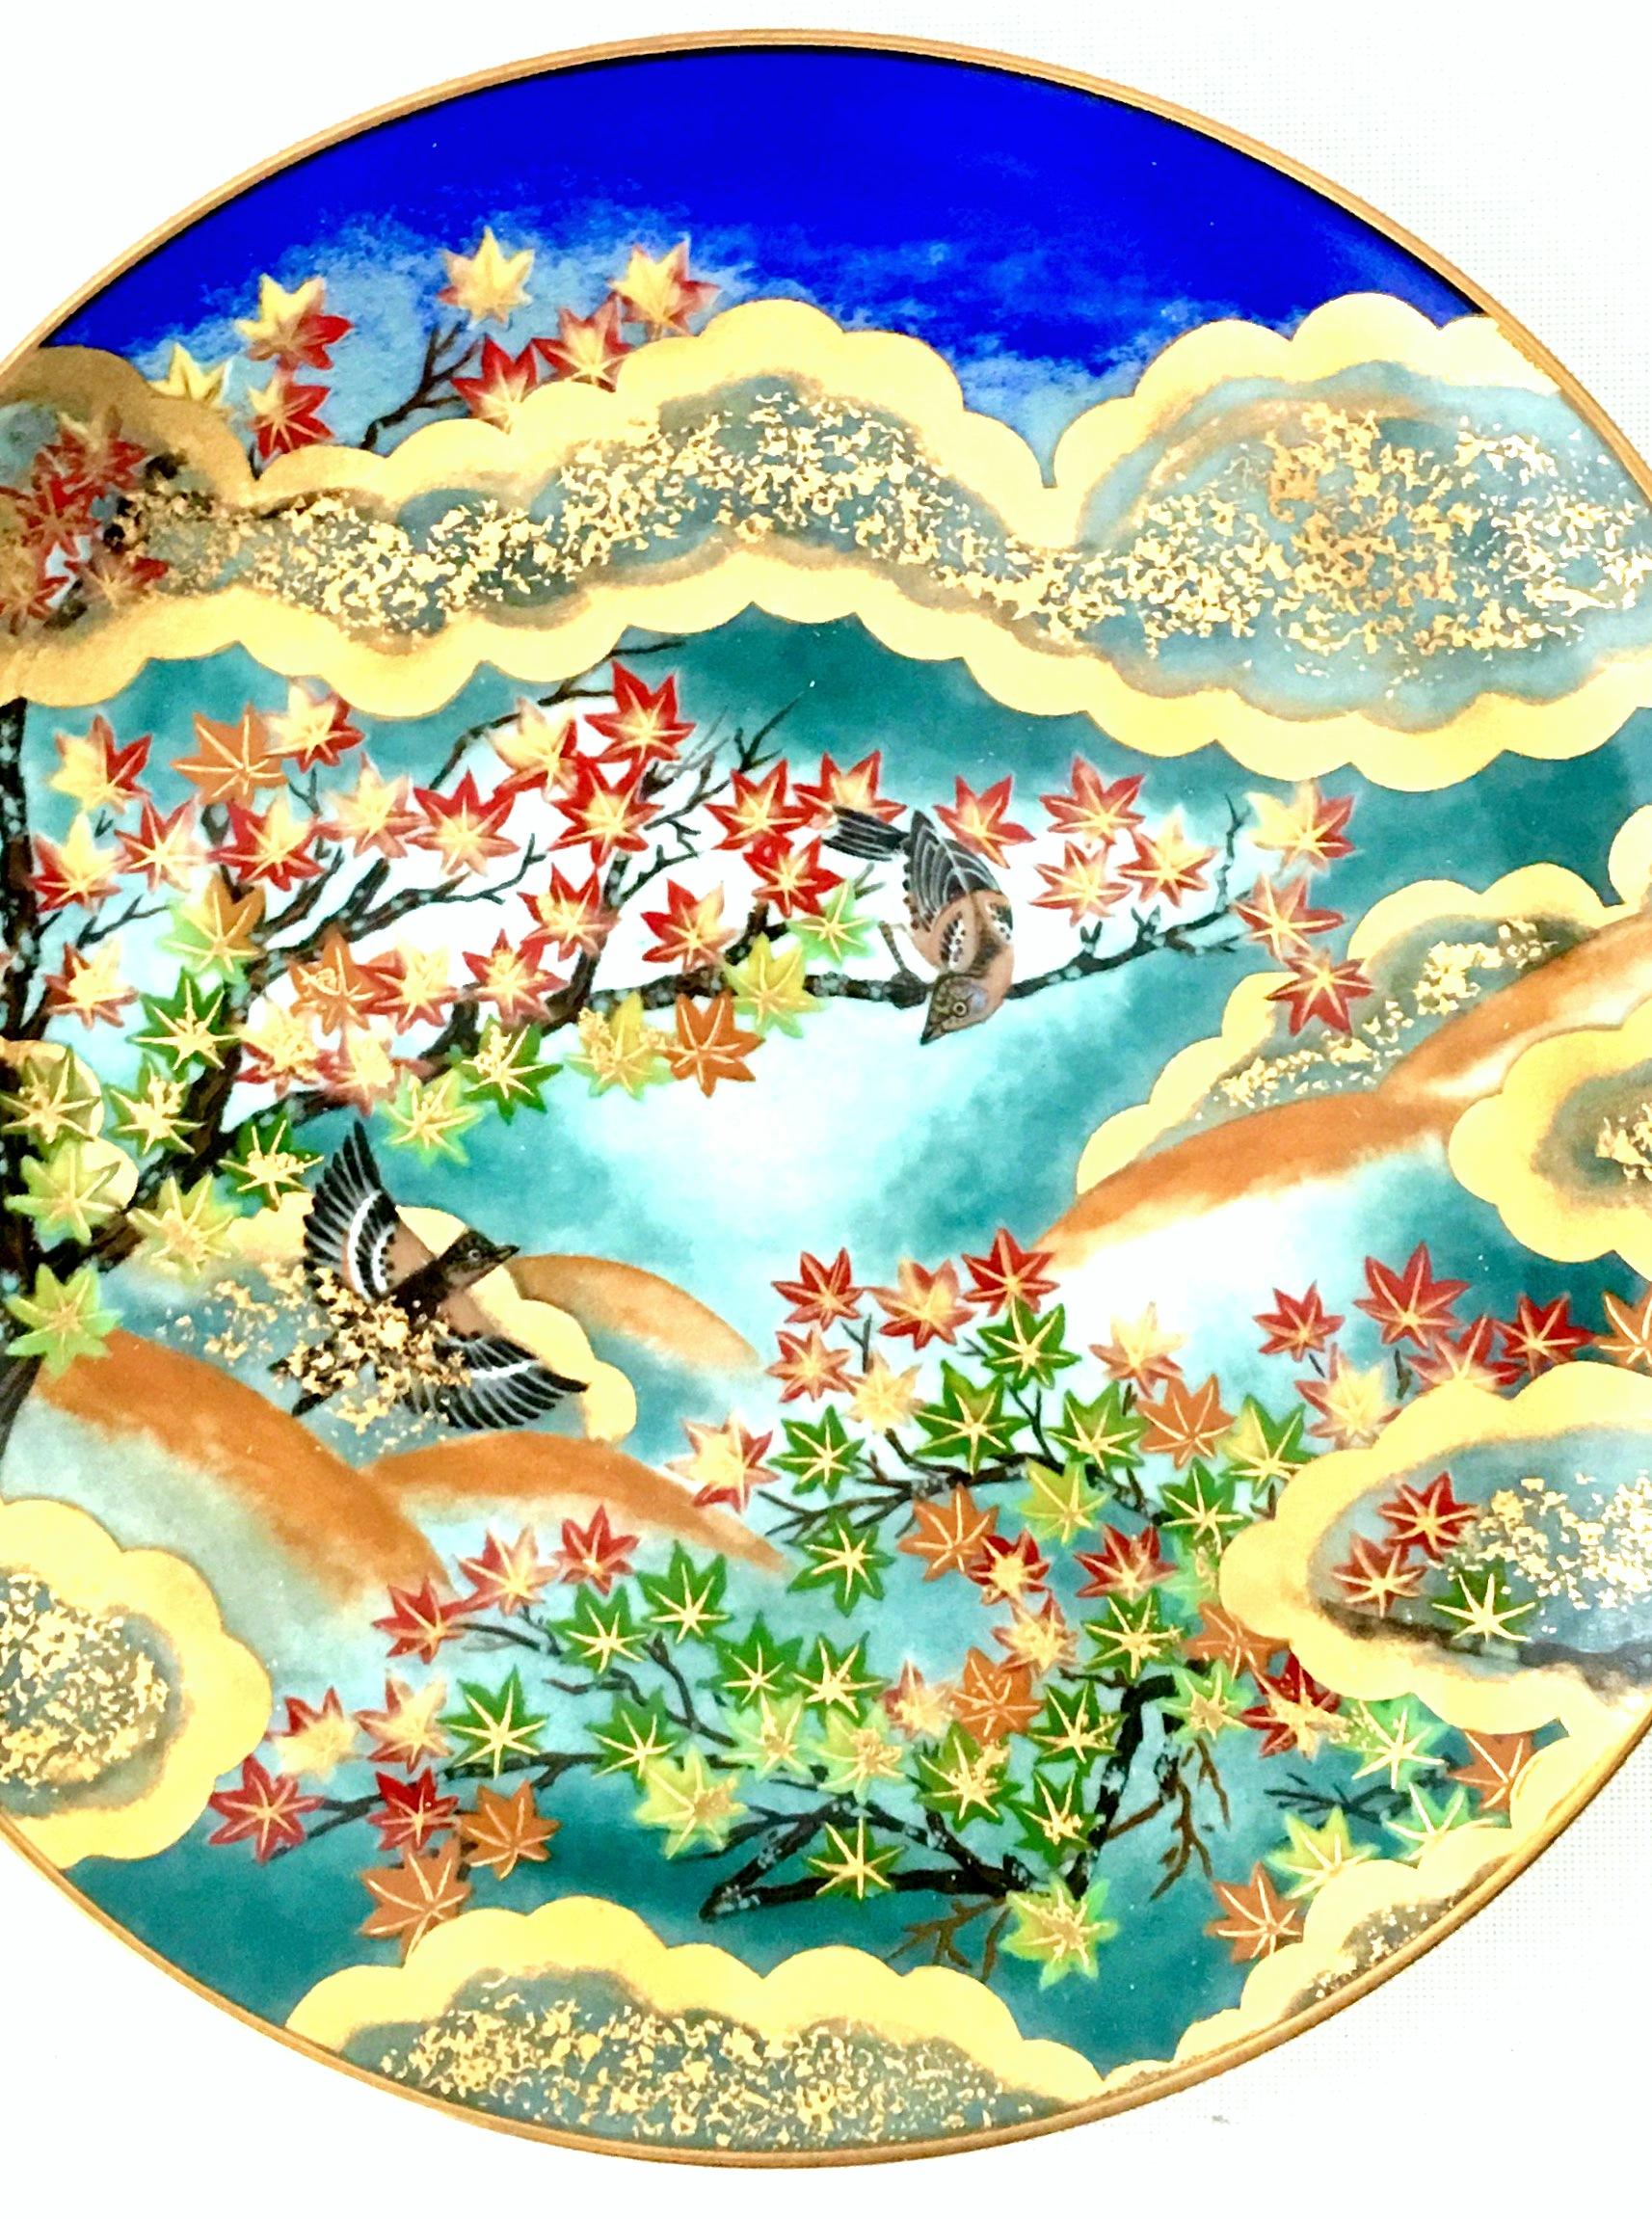 1986 Japanese Limited Edition Hand-Painted Porcelain Plates Set of 4 For Sale 2